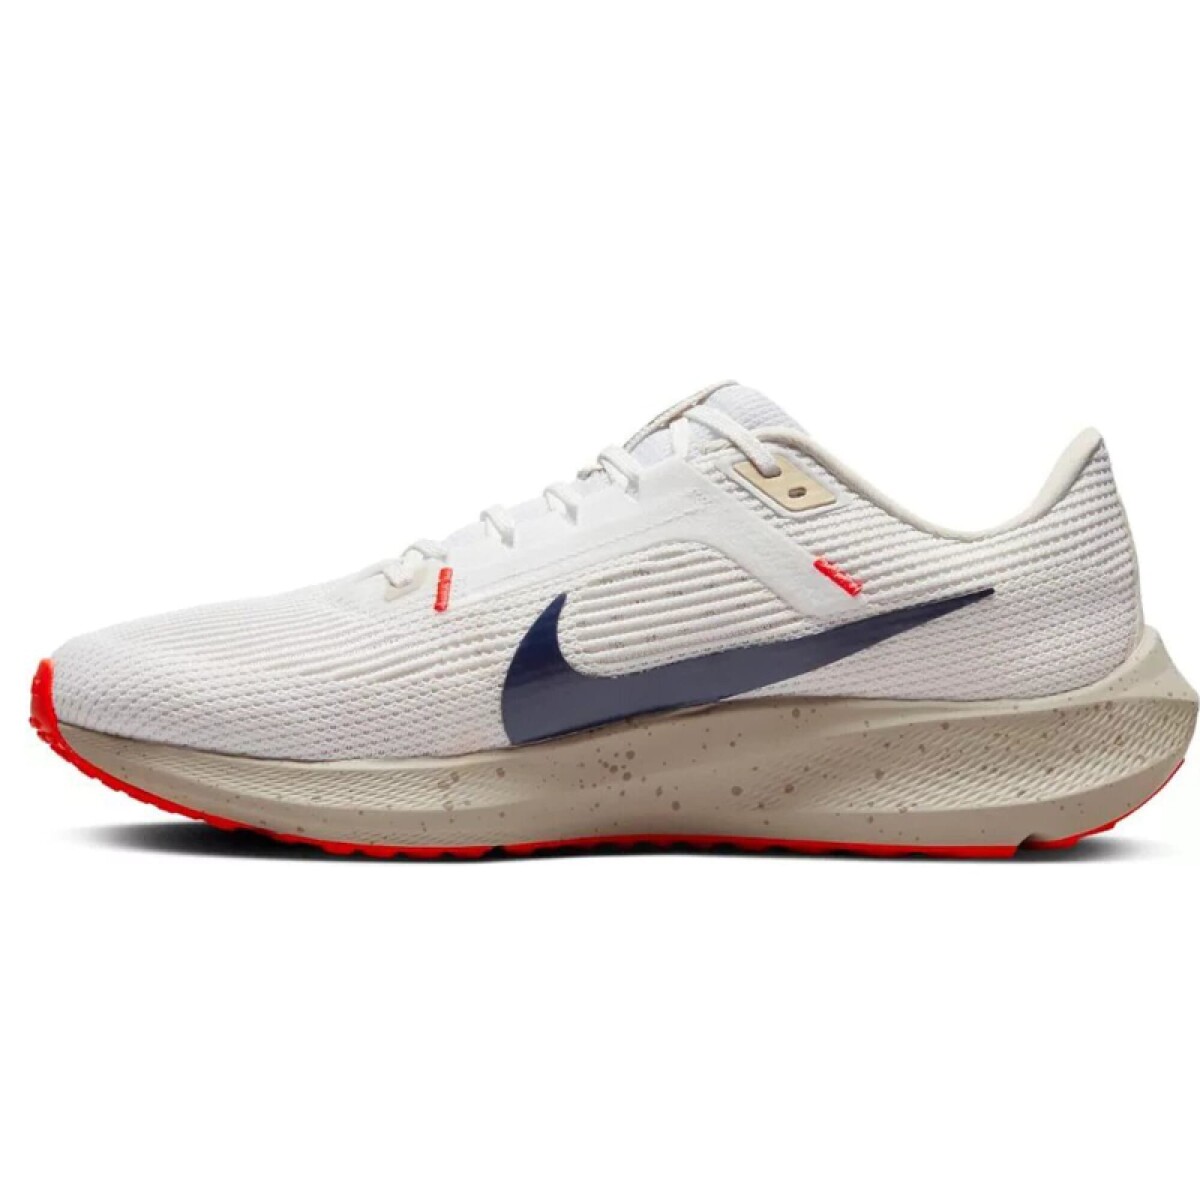 Champion Nike Running Hombre Air Zoom Pegasus 40 White/Obsdn - S/C 